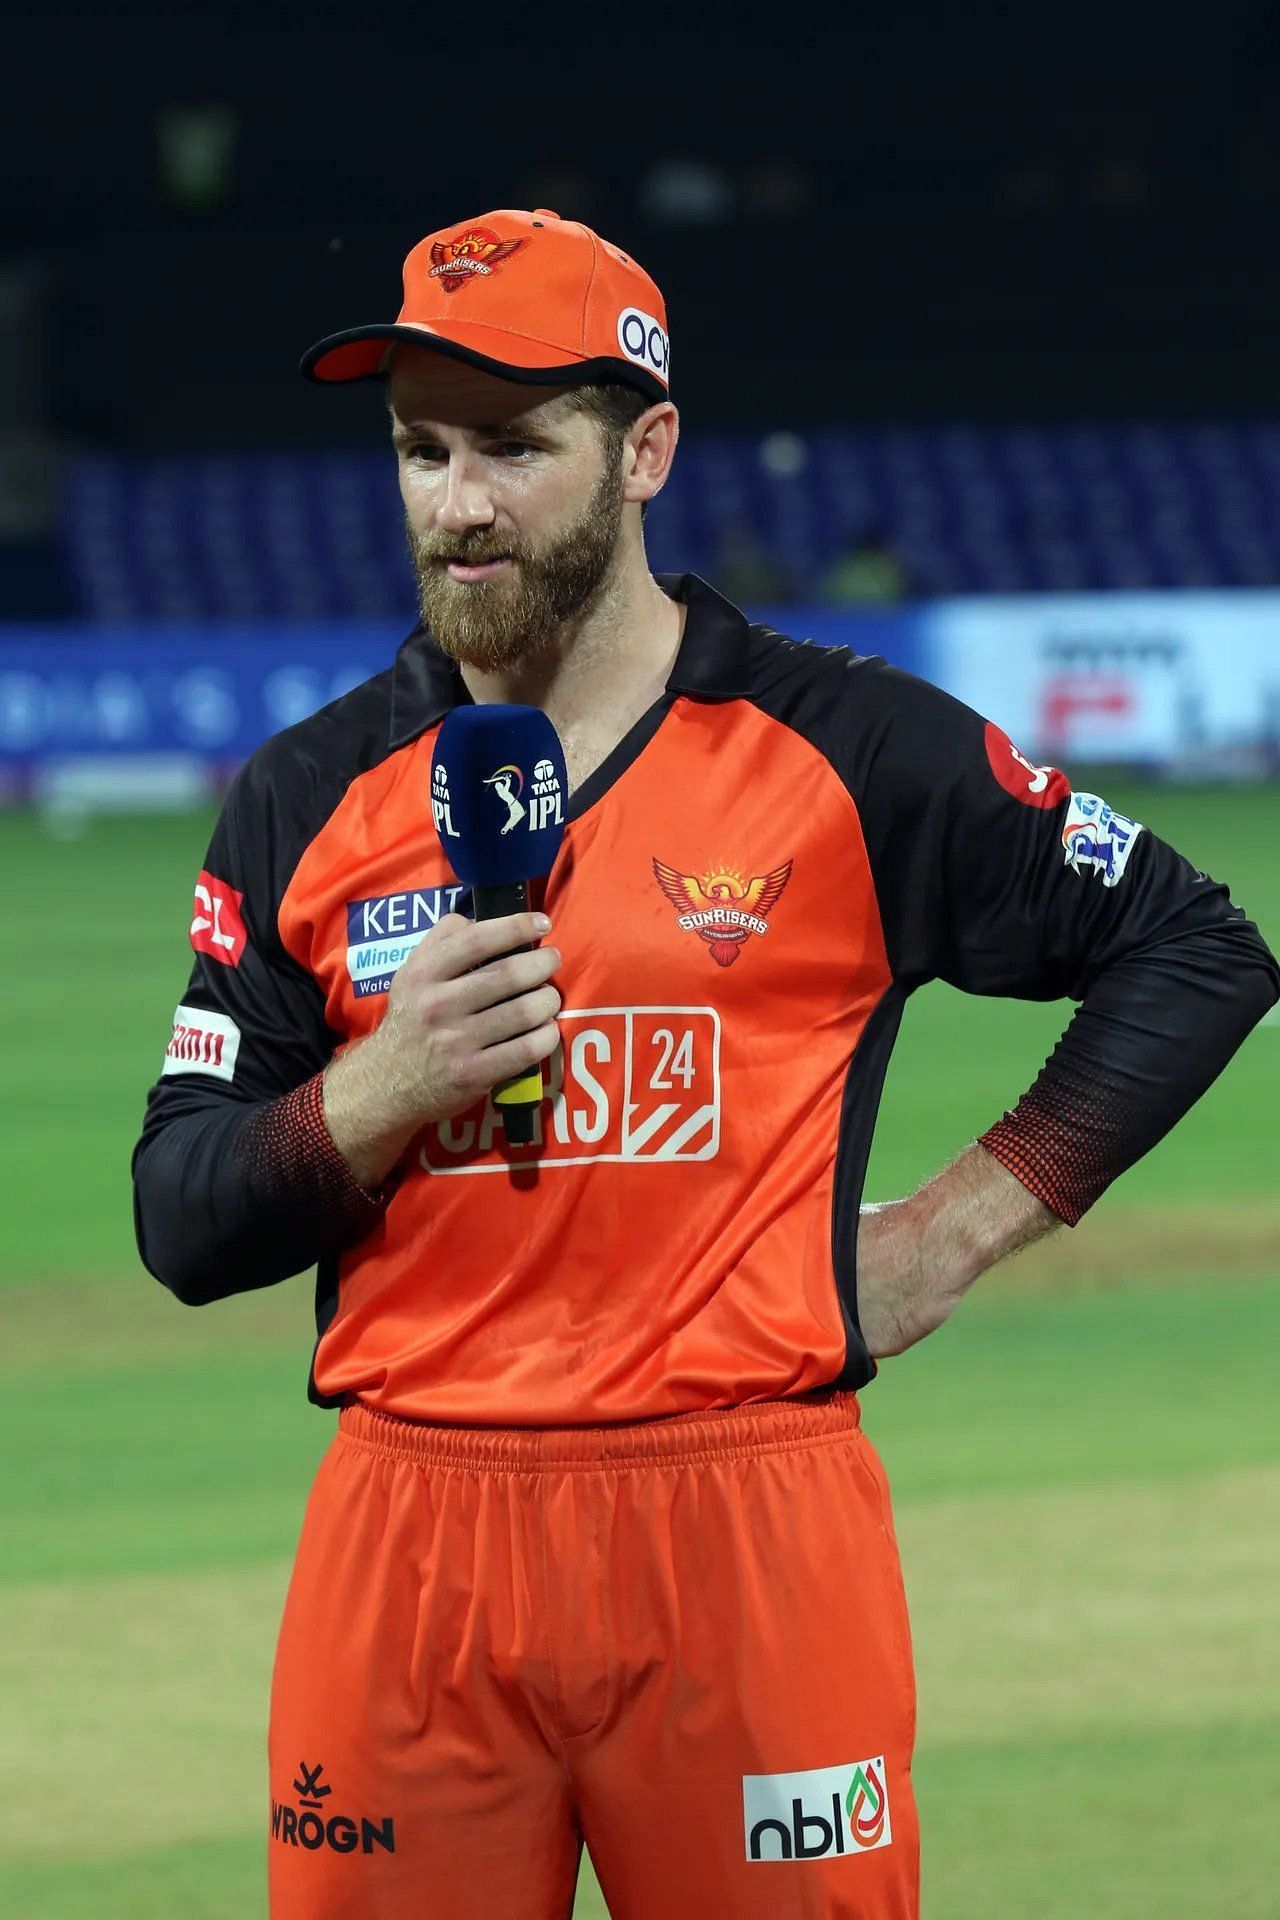 Kane Williamson will breathe a shy of relief after SRH defeated CSK (Credit: BCCI/IPL)